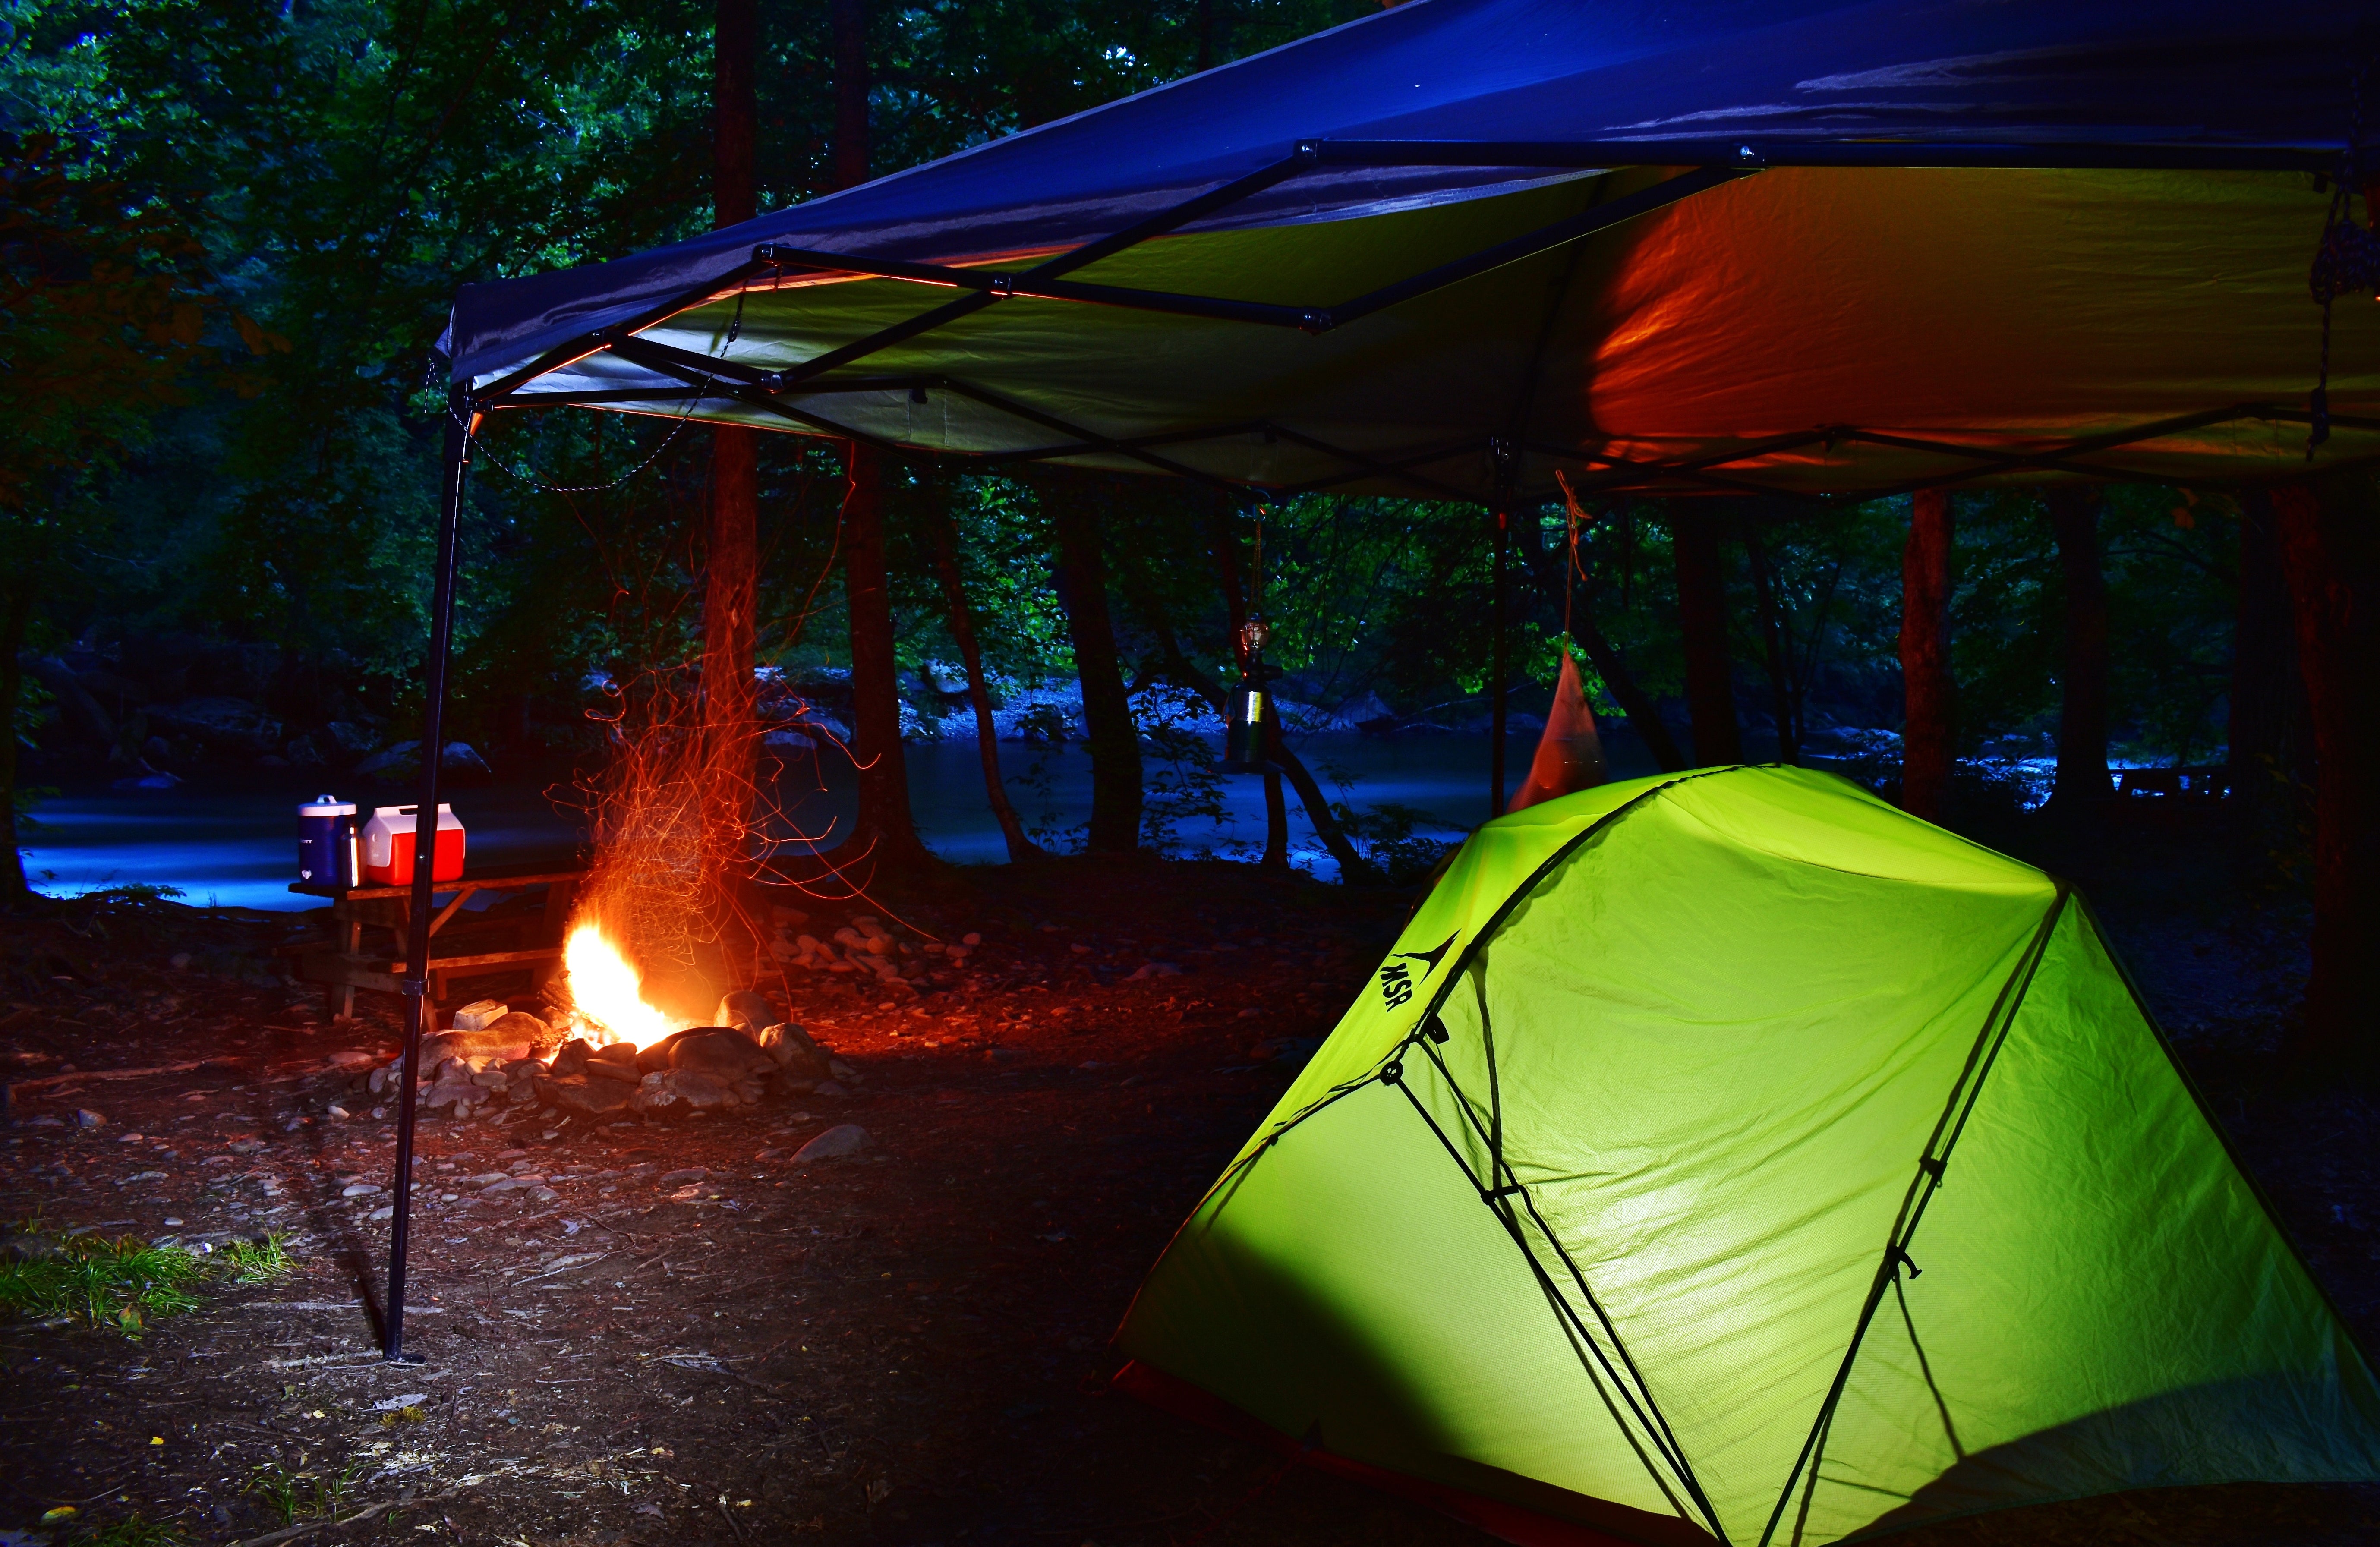 This is one of my favorite photos at this campground.  It shows my tent, the fire, and the river at night.